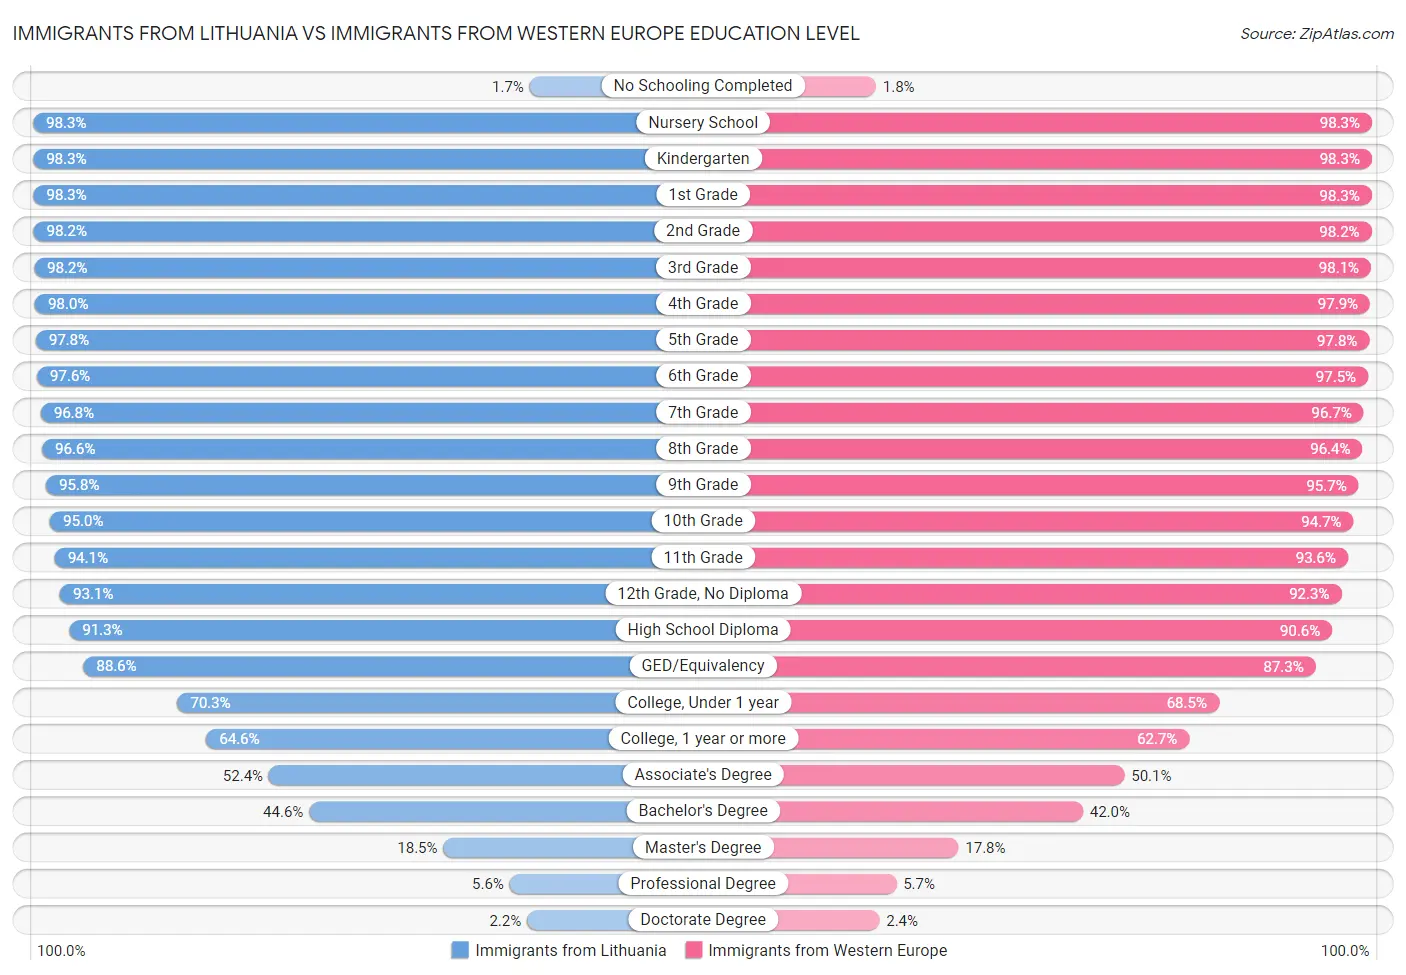 Immigrants from Lithuania vs Immigrants from Western Europe Education Level